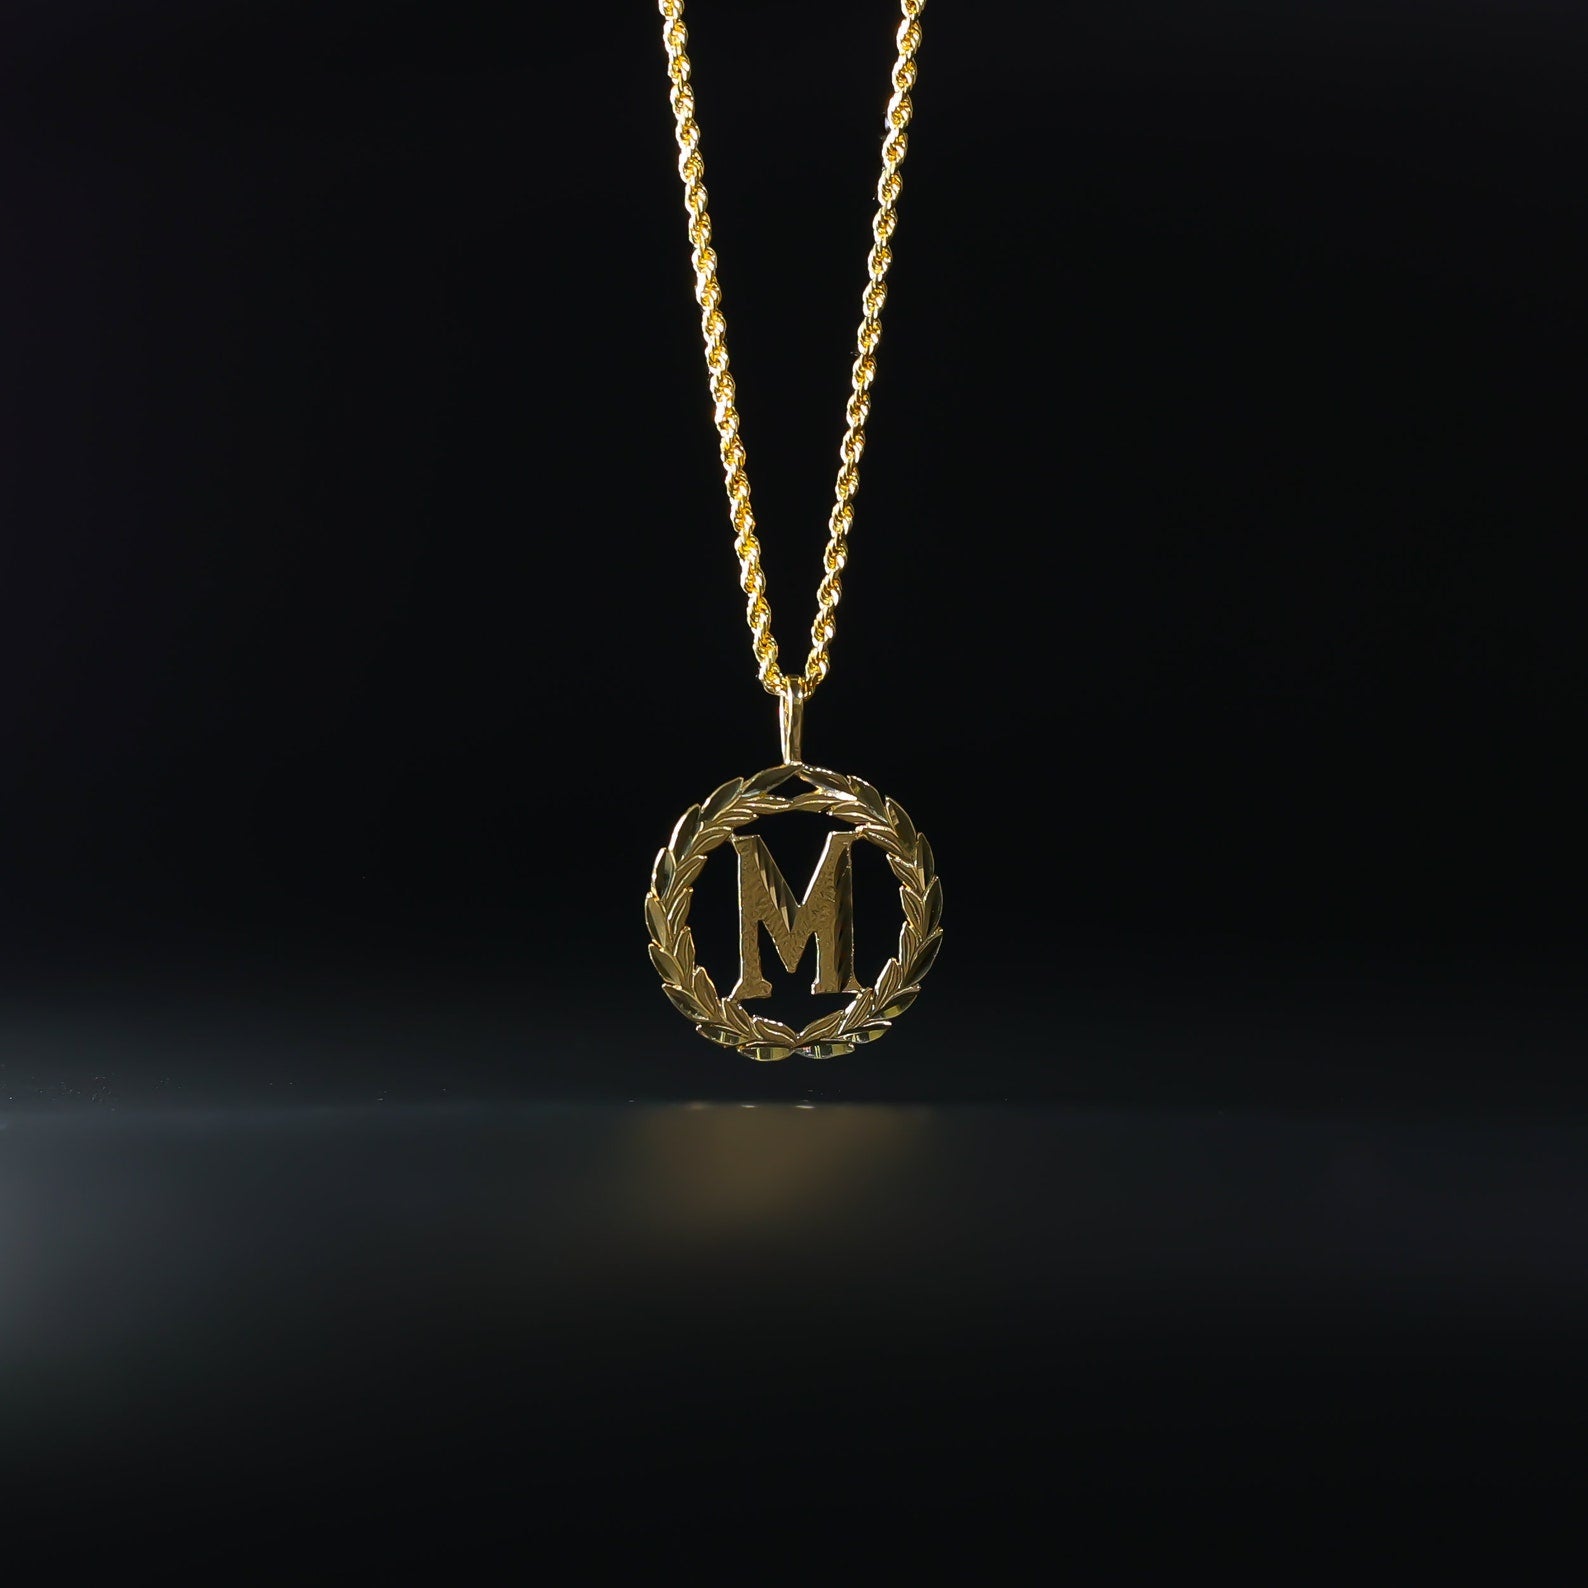 Gold Wreath M Initial Pendant | A-Z Pendants - Charlie & Co. Jewelry